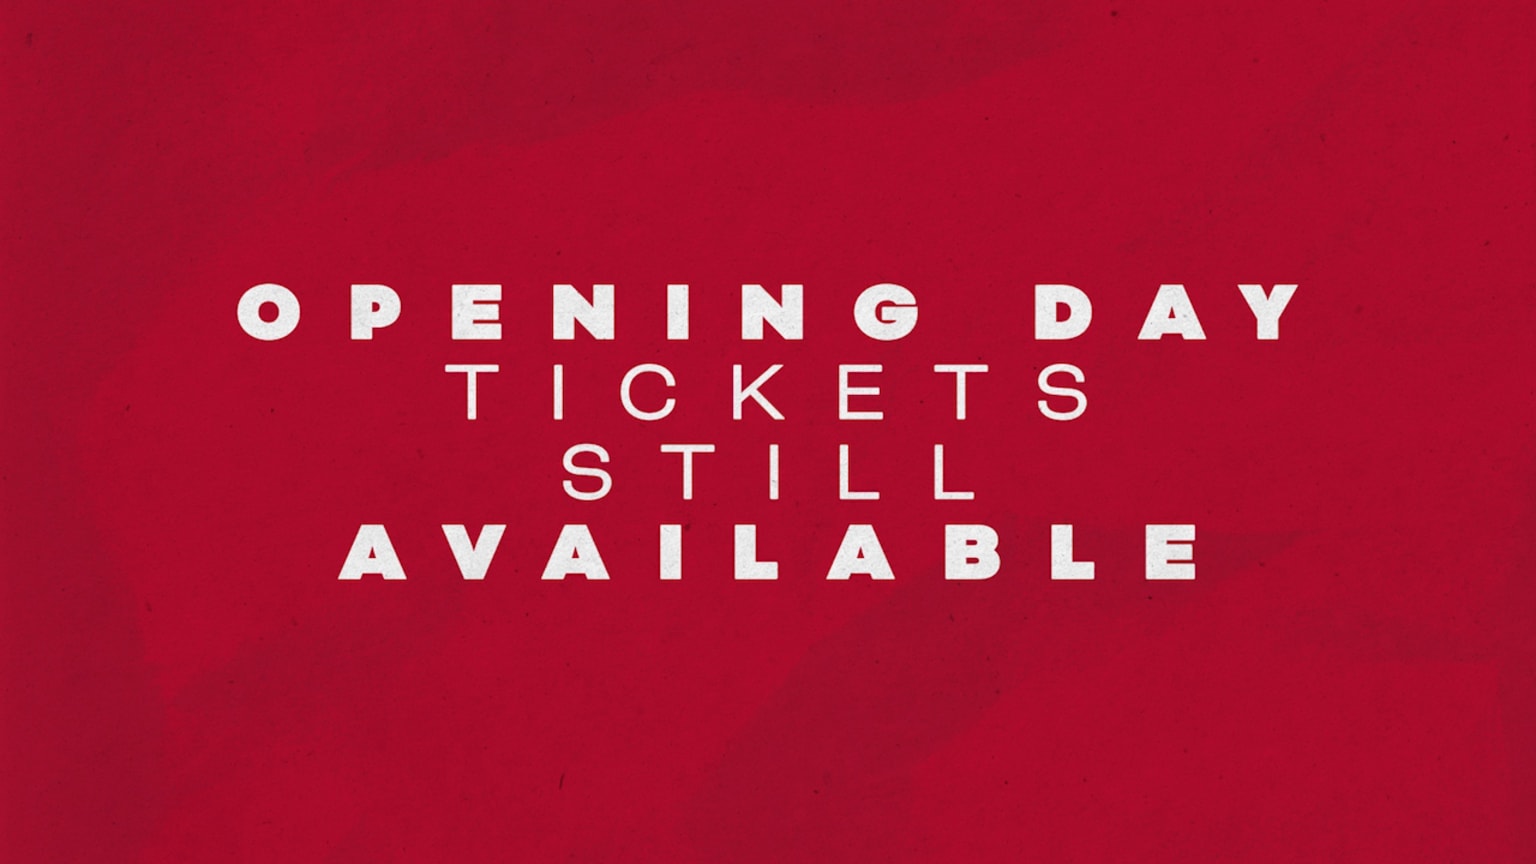 Get your Opening Day tickets | 03/04/2020 | St. Louis Cardinals